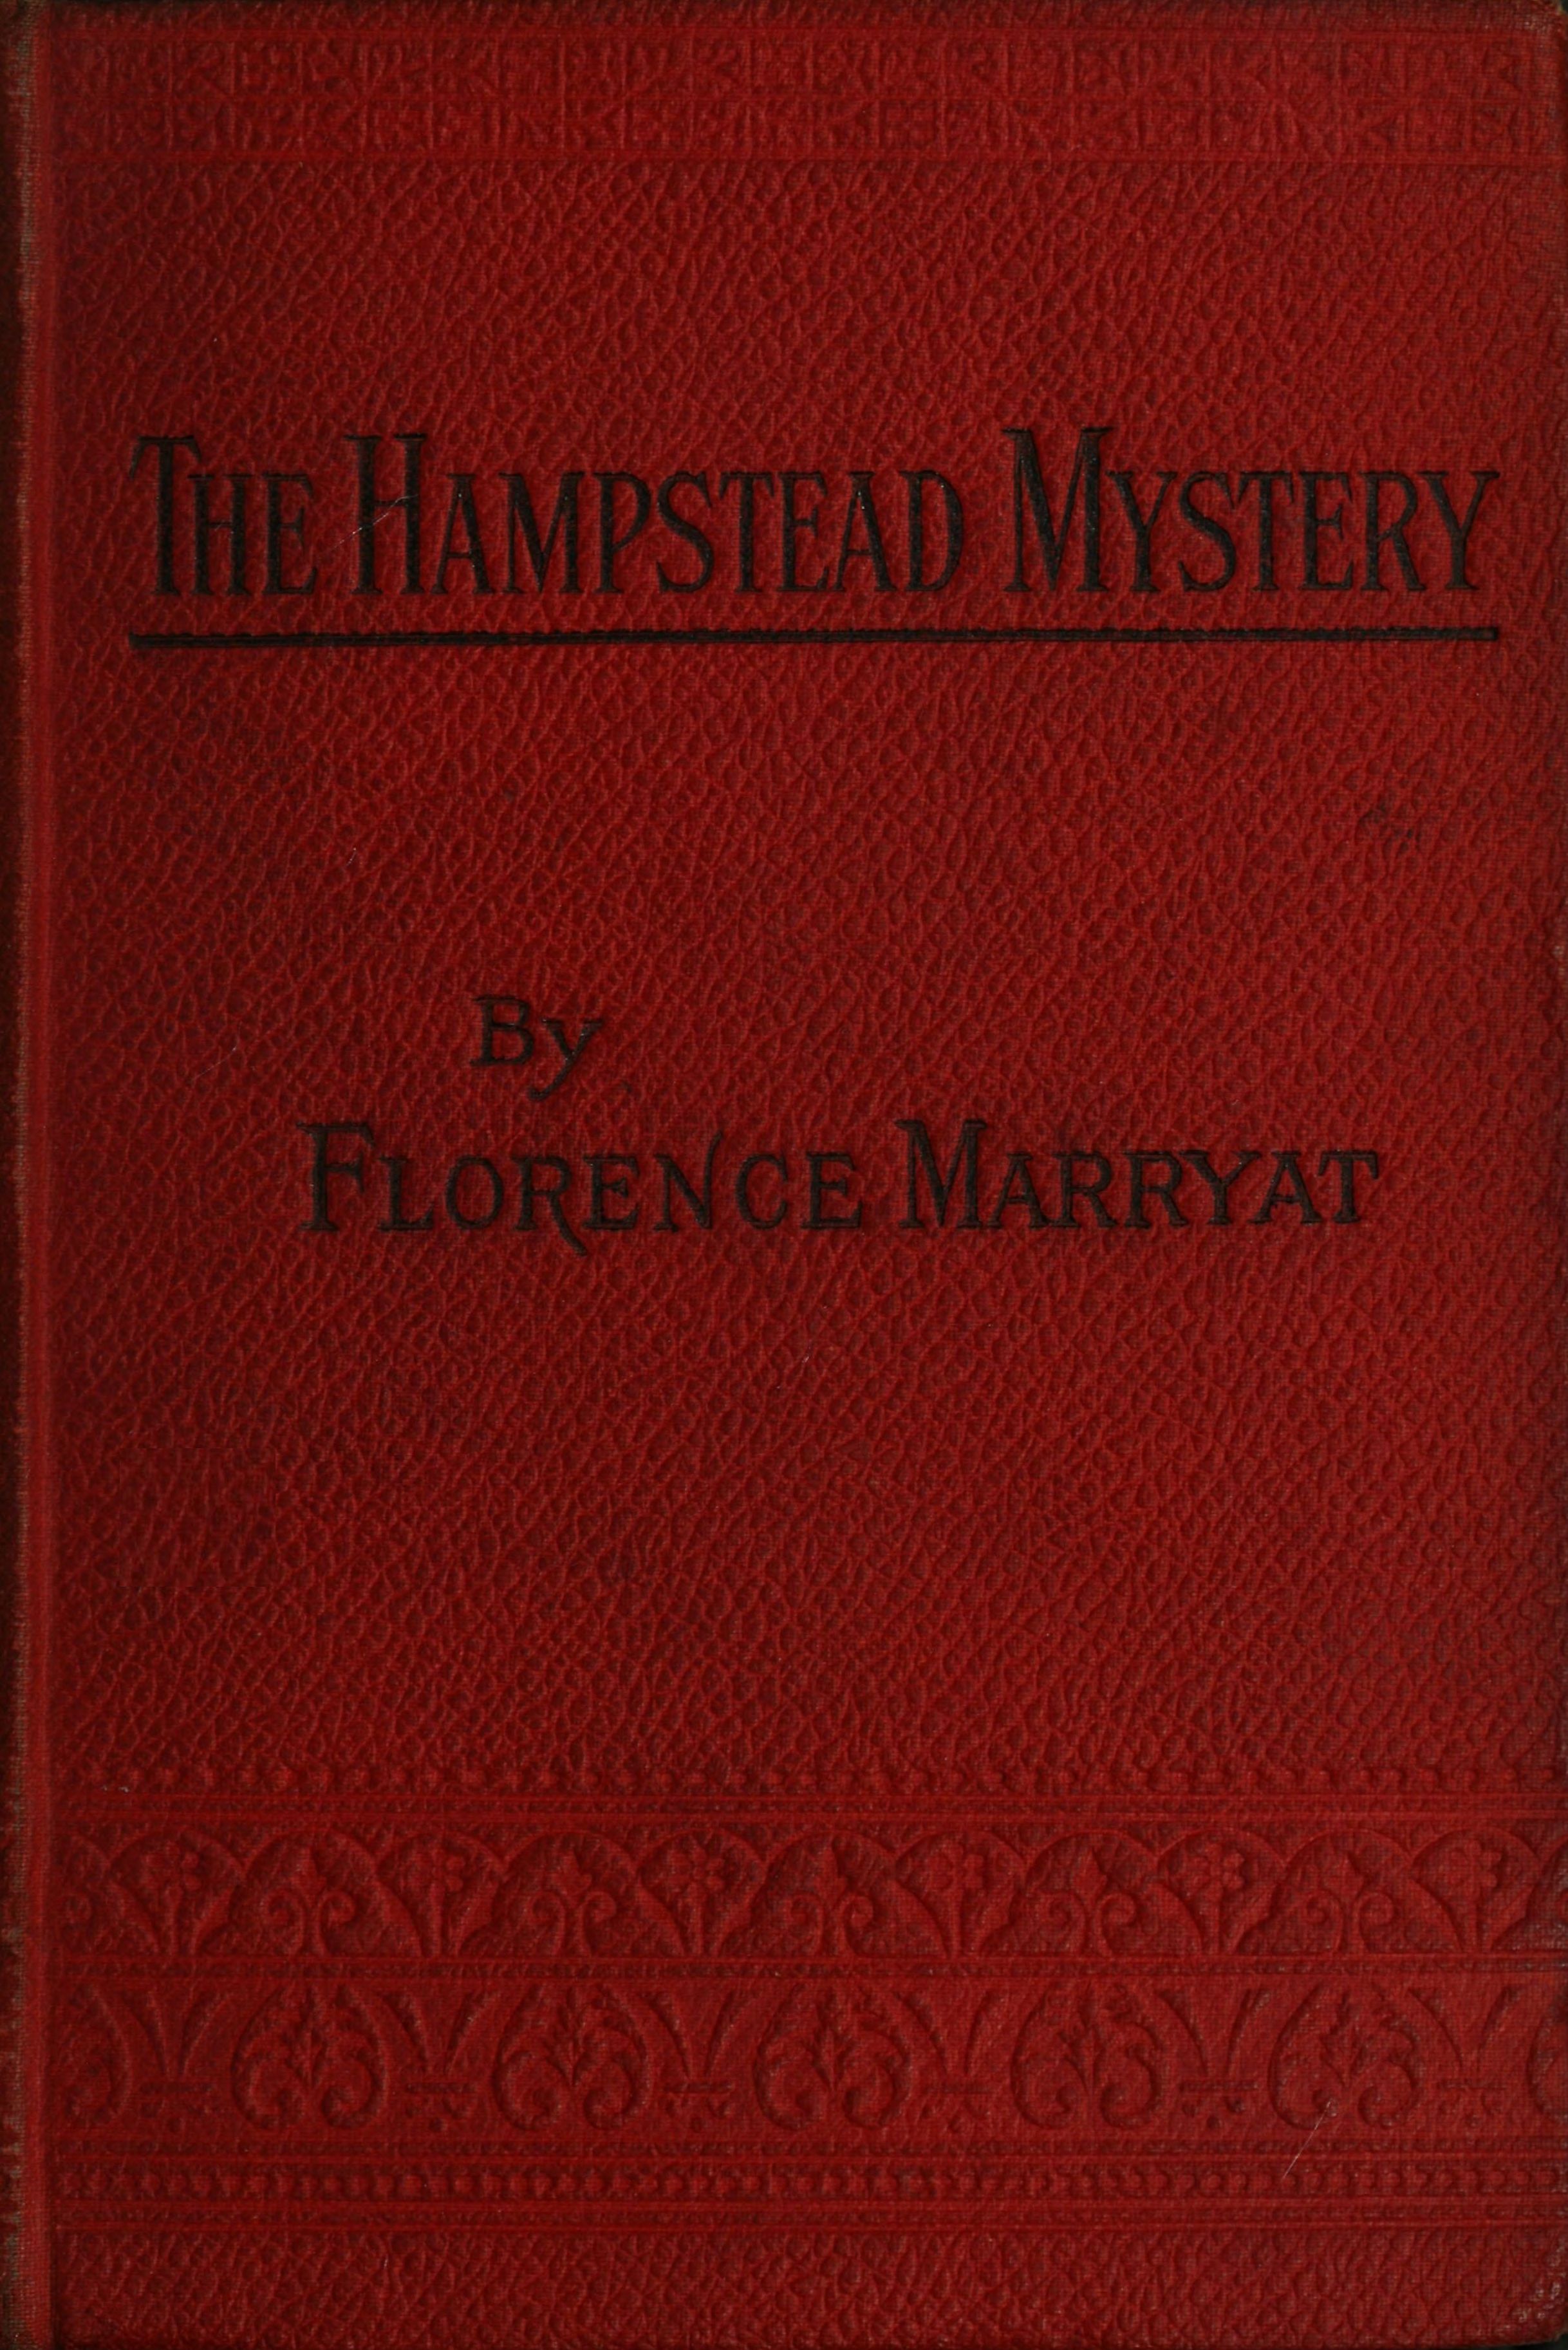 The Hampstead Mystery, by Florence Marryat—A Project Gutenberg eBook image